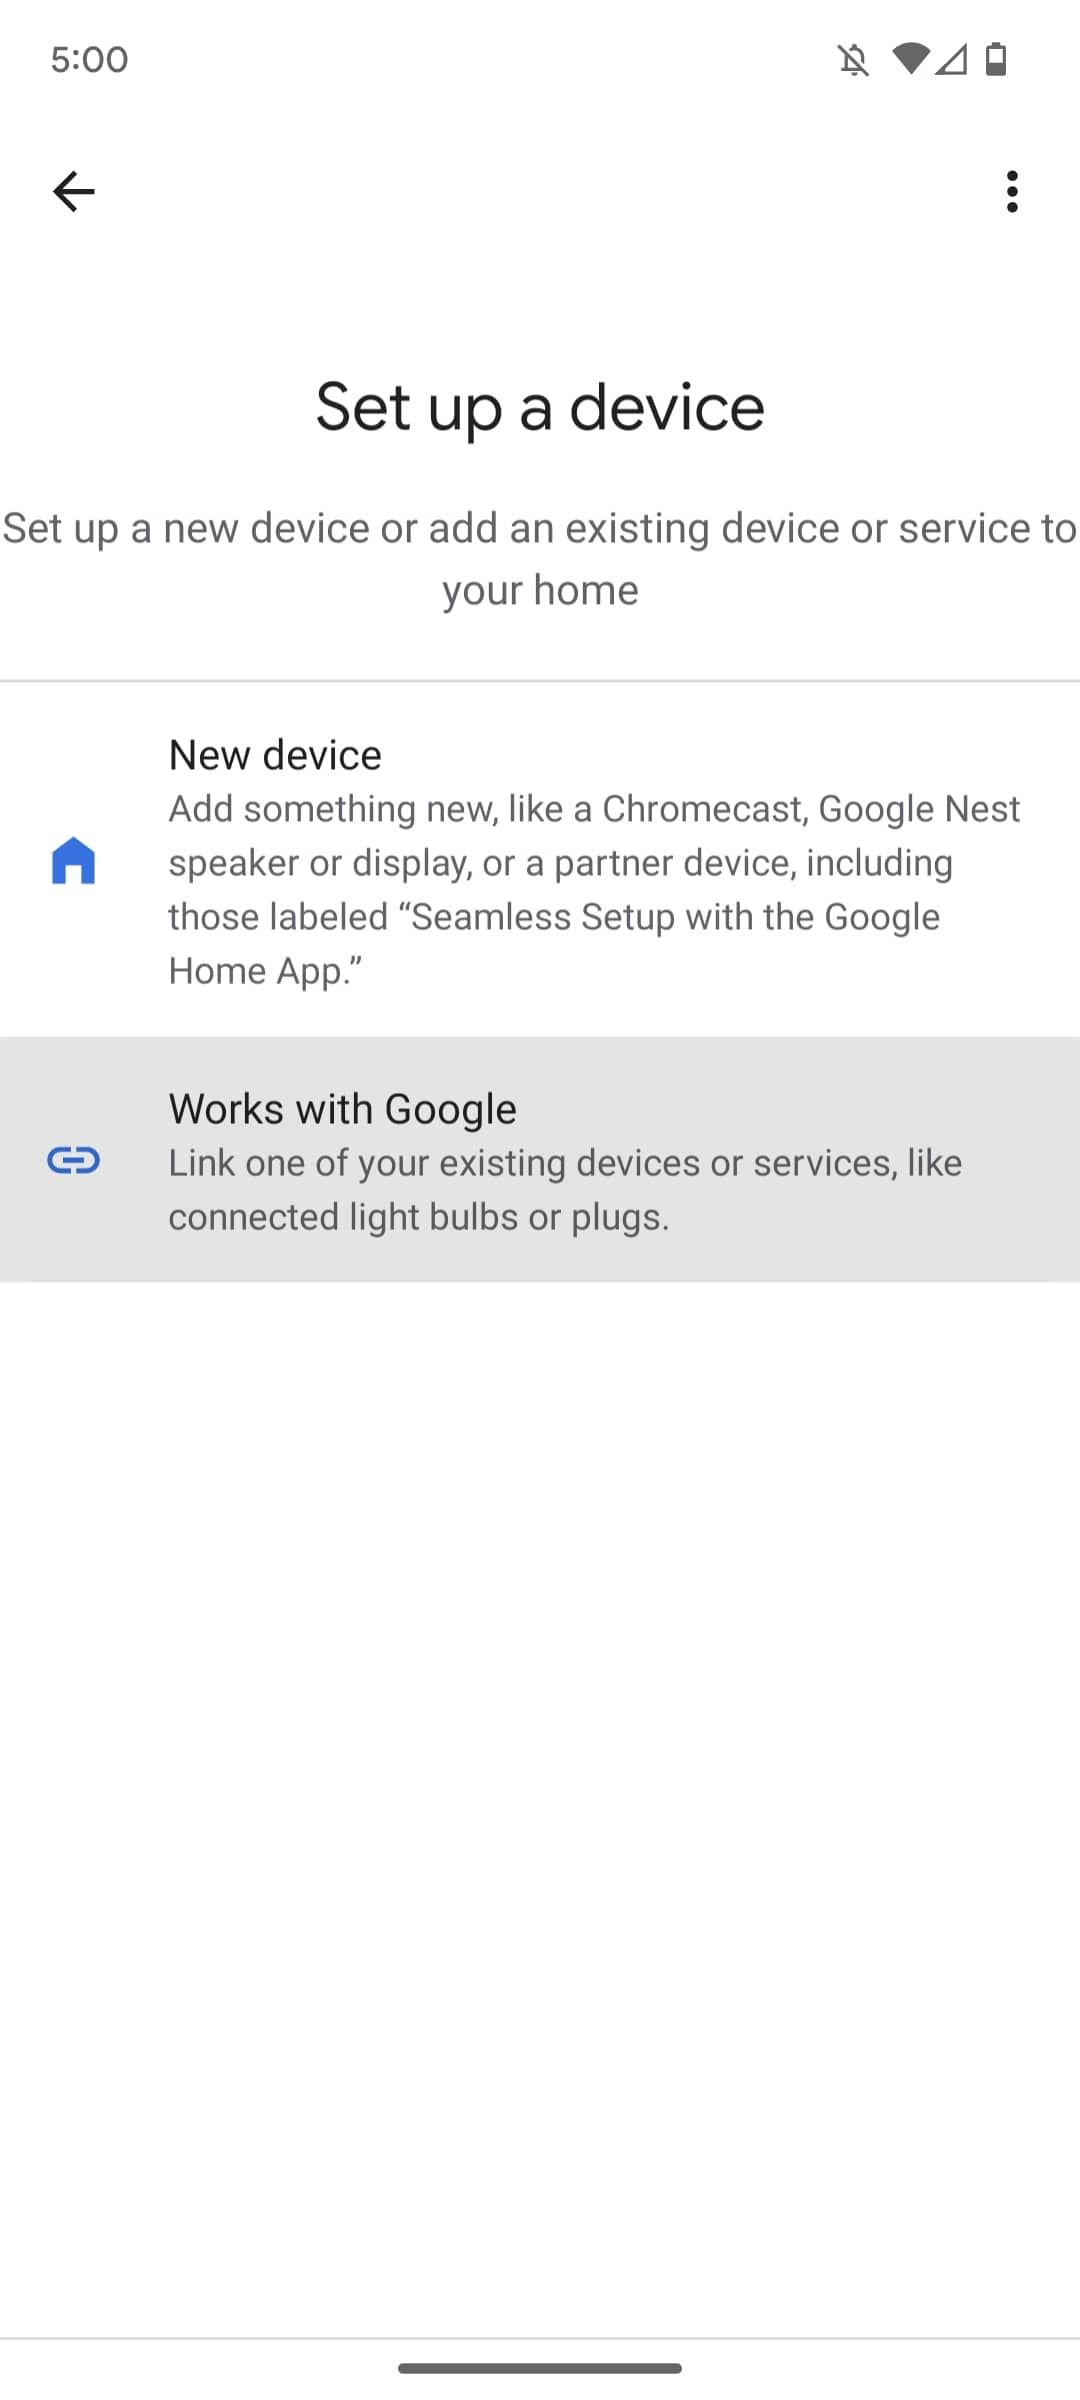 google home app menu showing options for adding a device